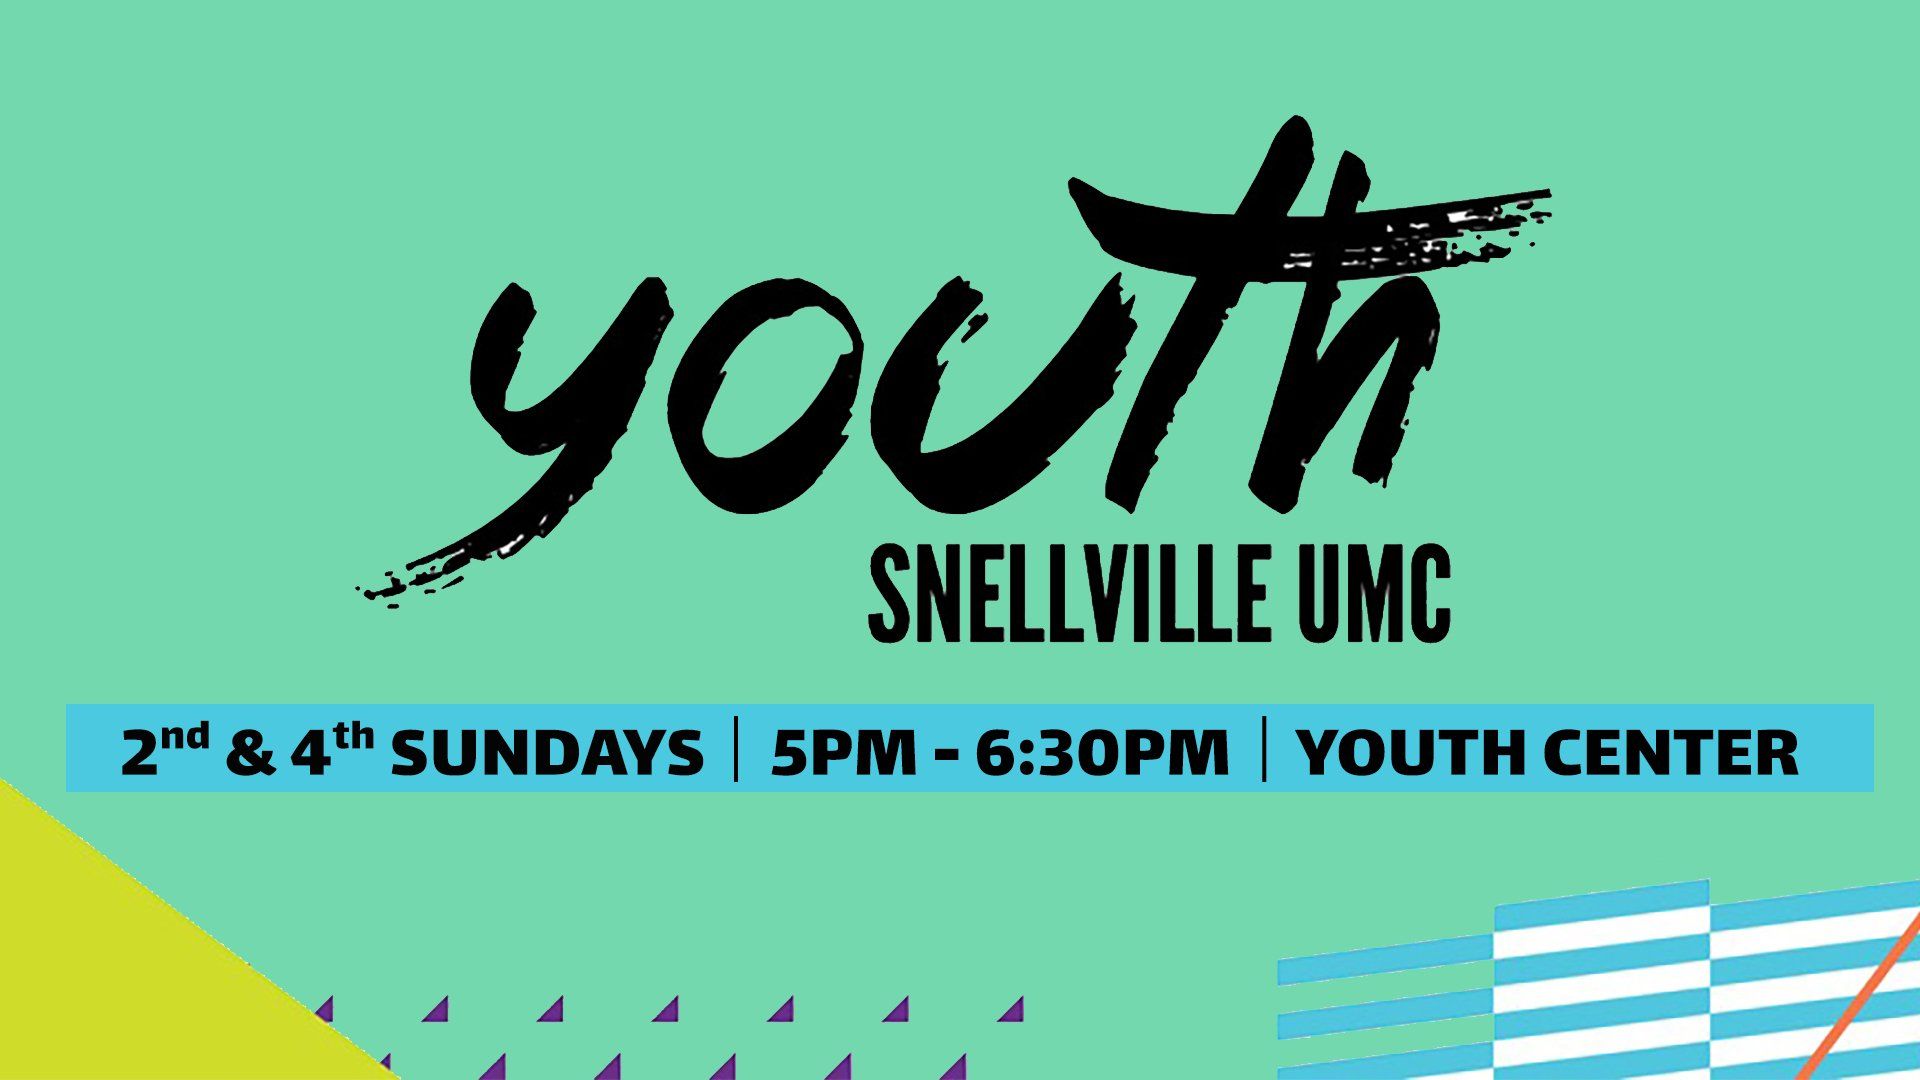 a poster for the youth center in snellville cc